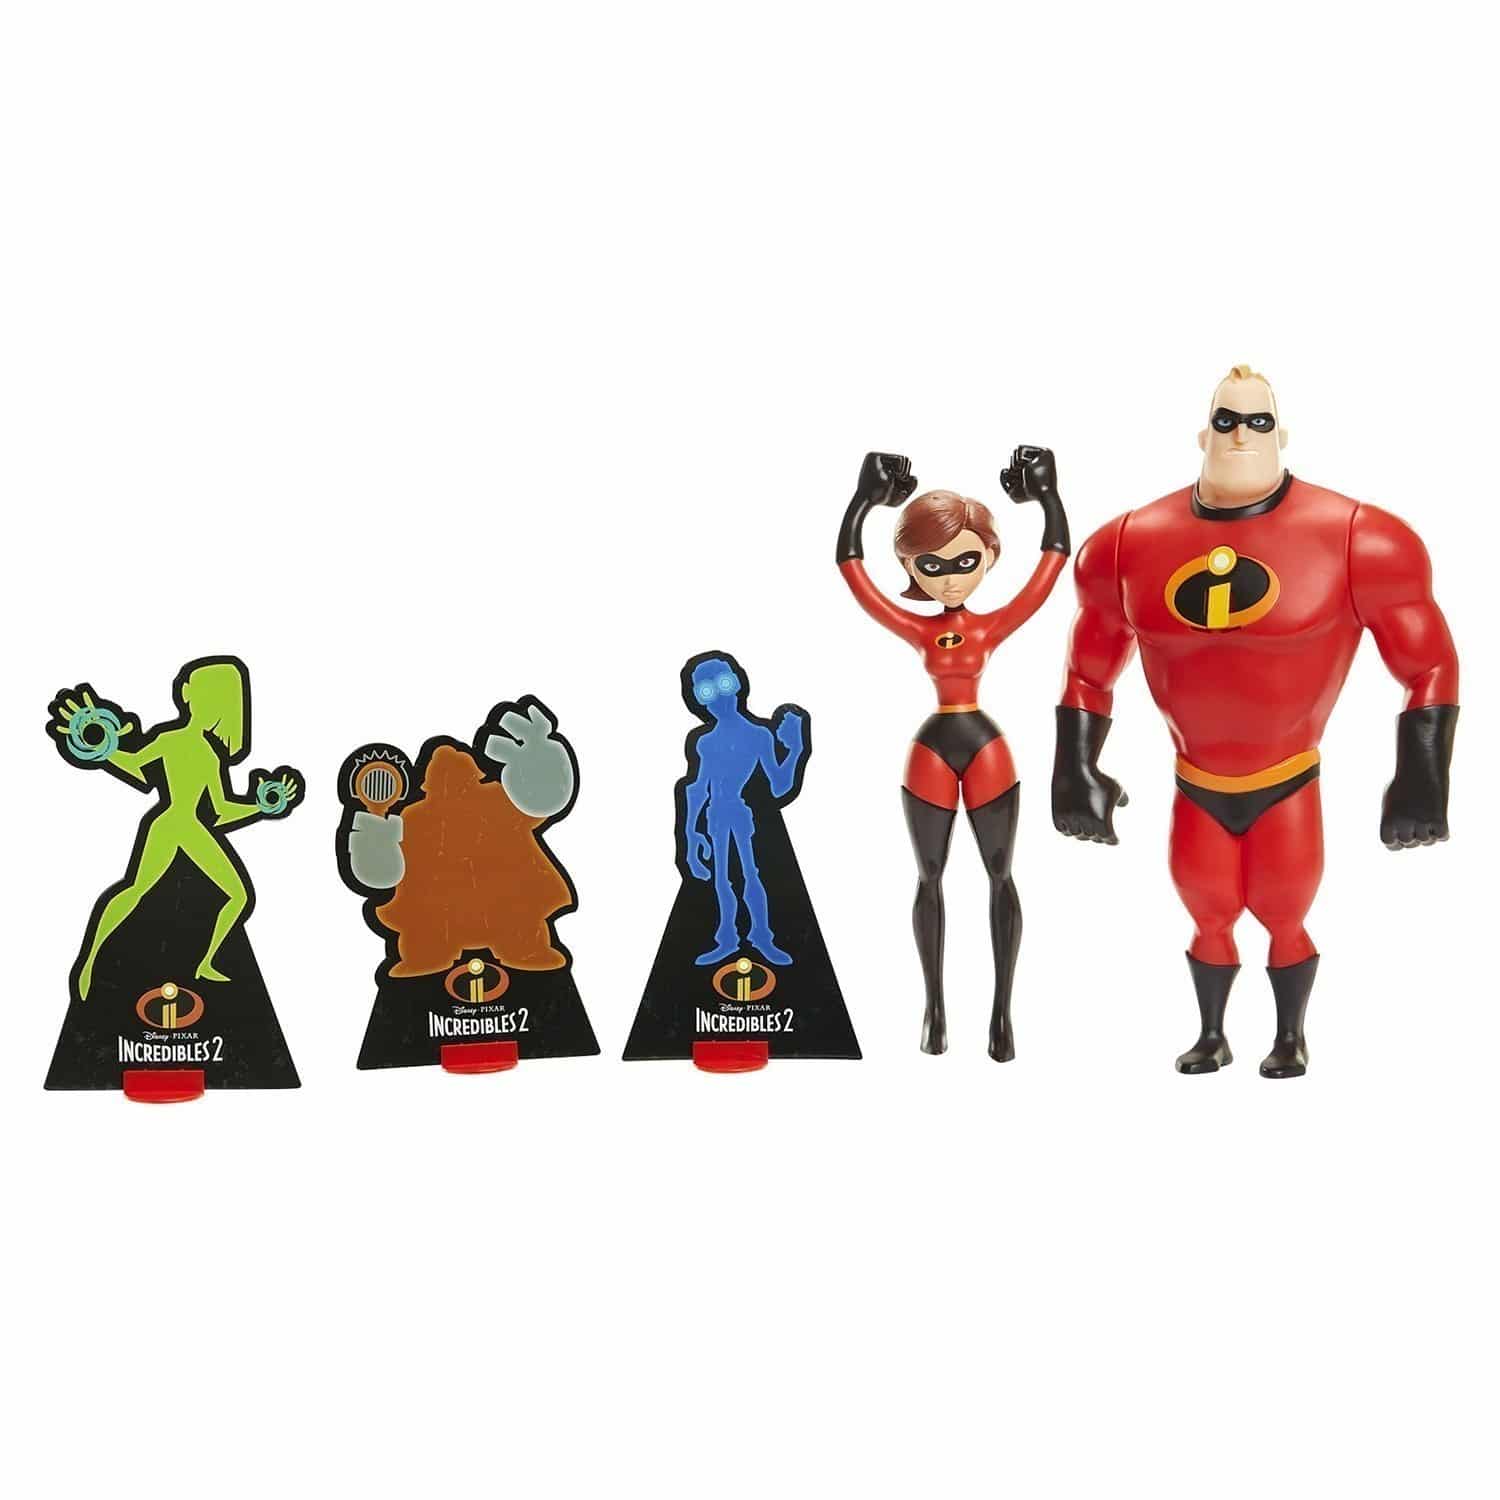 The Incredibles 2 - Power Couple Figures